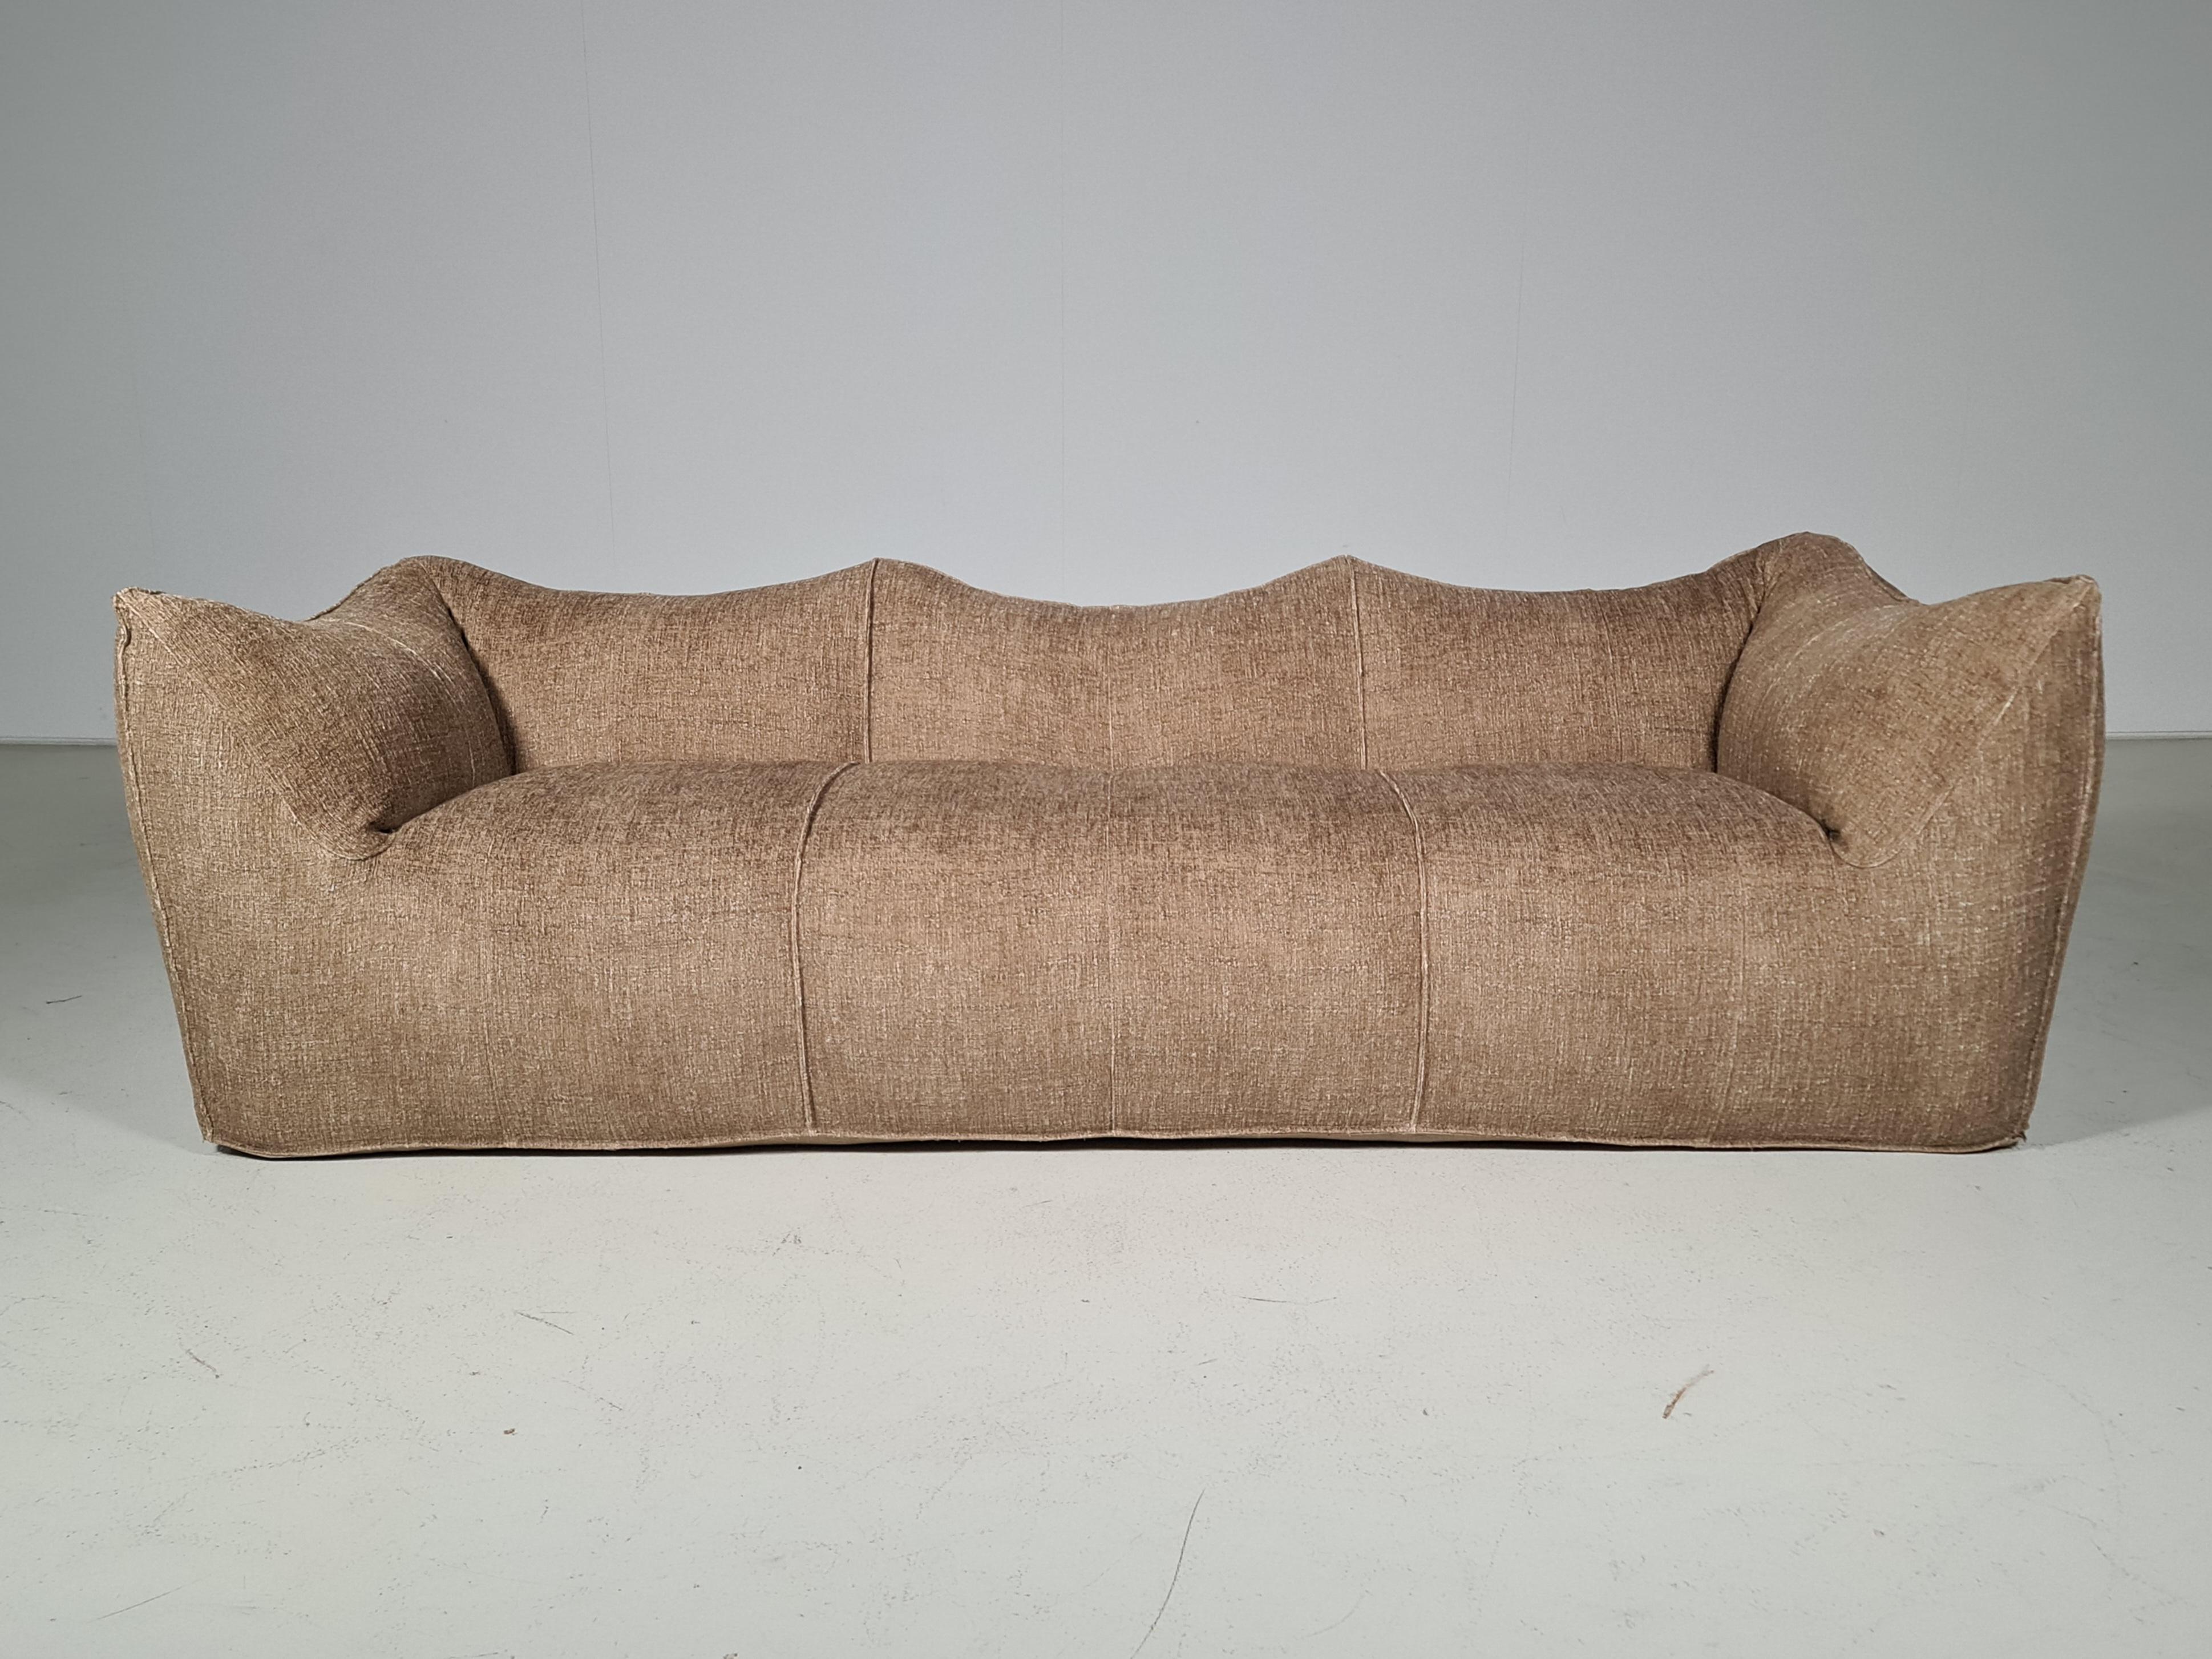 Le Bambole 3-seater sofa by Mario Bellini for B&B Italia, 1970s. An iconic piece of Italian design. It was awarded the 1979 'Compasso d'Oro' award. An example of Le Bambole is included in MoMA's permanent collection.

The sofa is reupholstered in